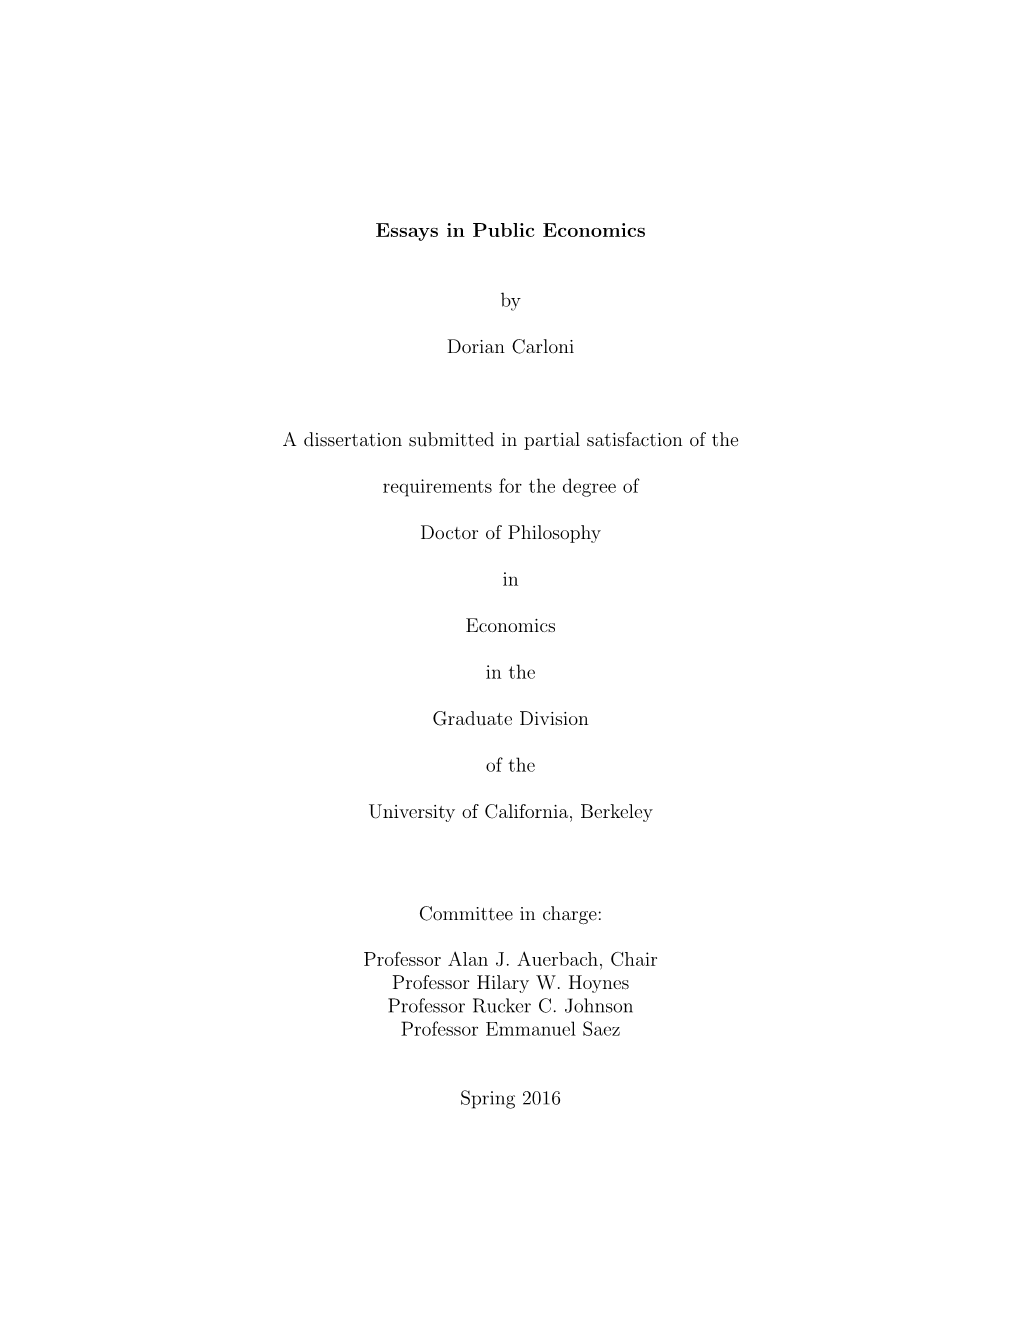 Essays in Public Economics by Dorian Carloni a Dissertation Submitted In